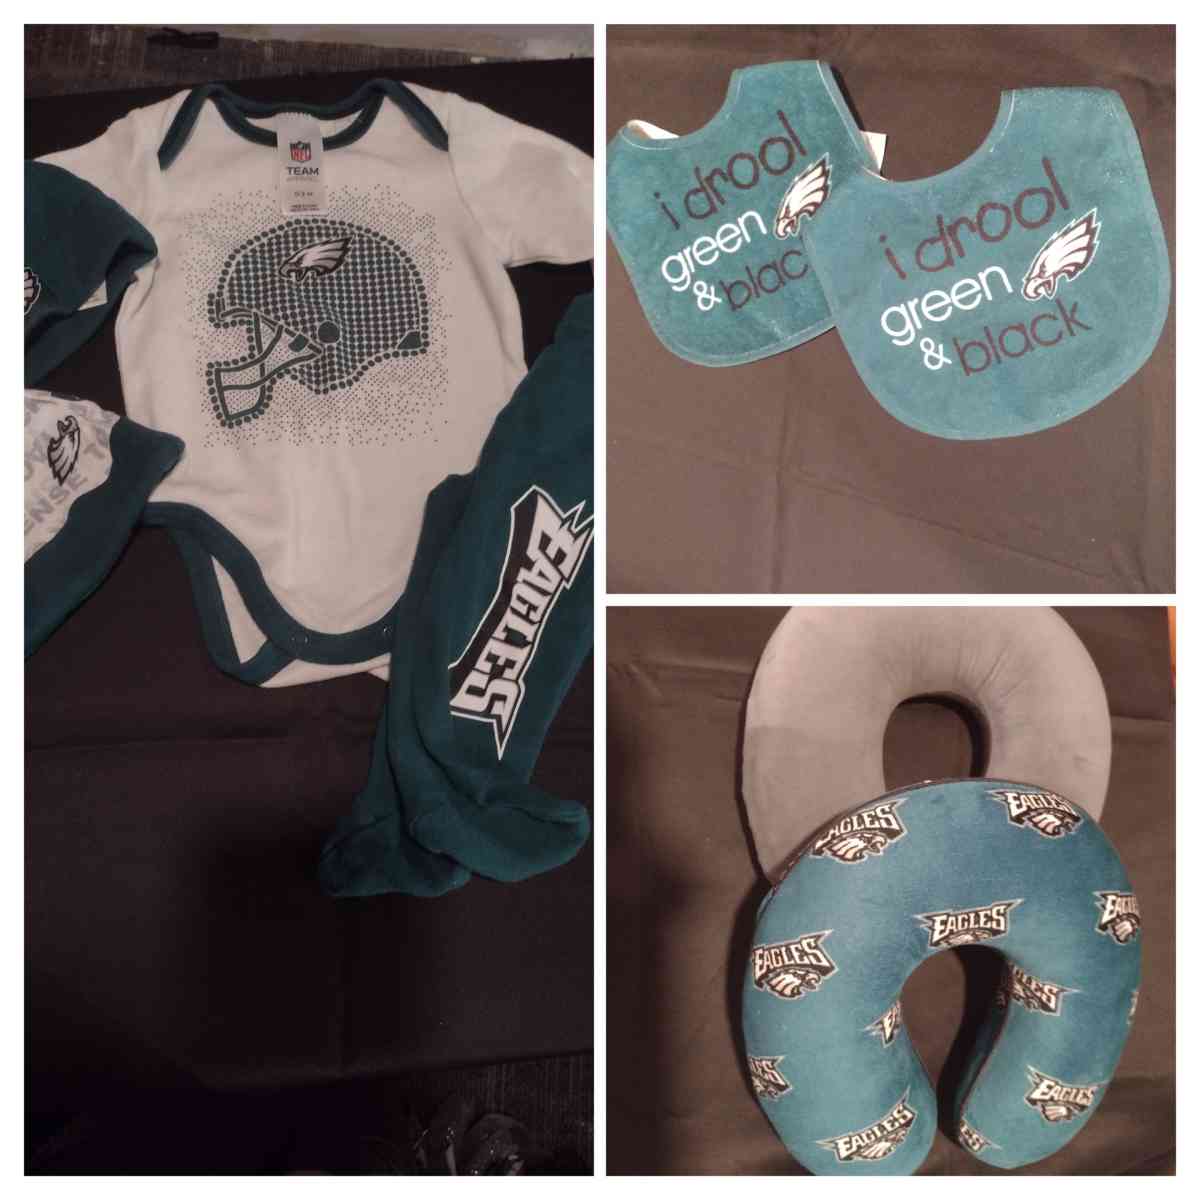 eagles outfit bundle for baby